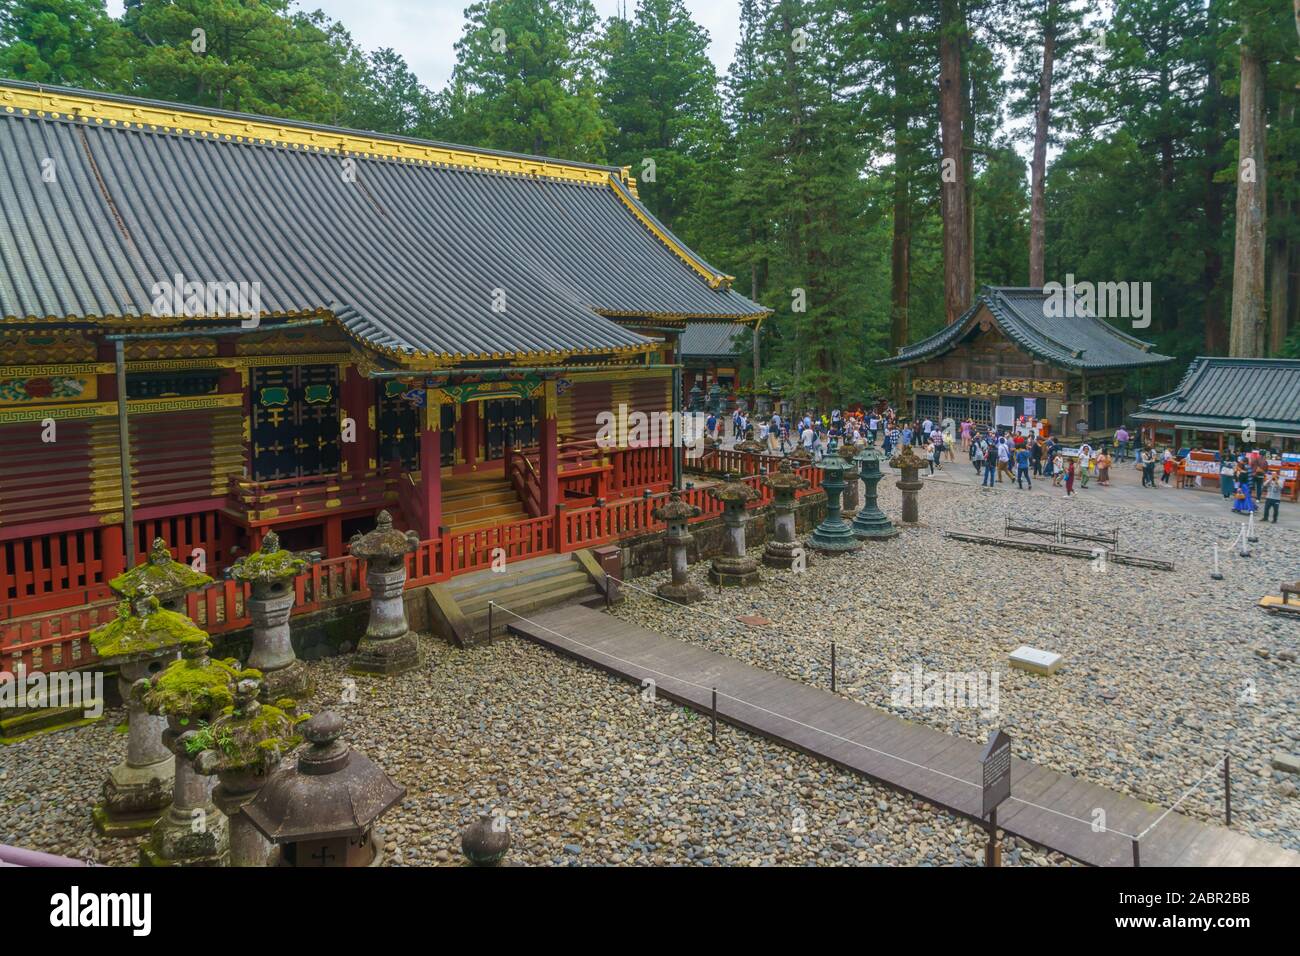 Nikko, Japan - September 29, 2019: View of the compound of Tosho-gu shrine, with visitors, in Nikko, Japan Stock Photo